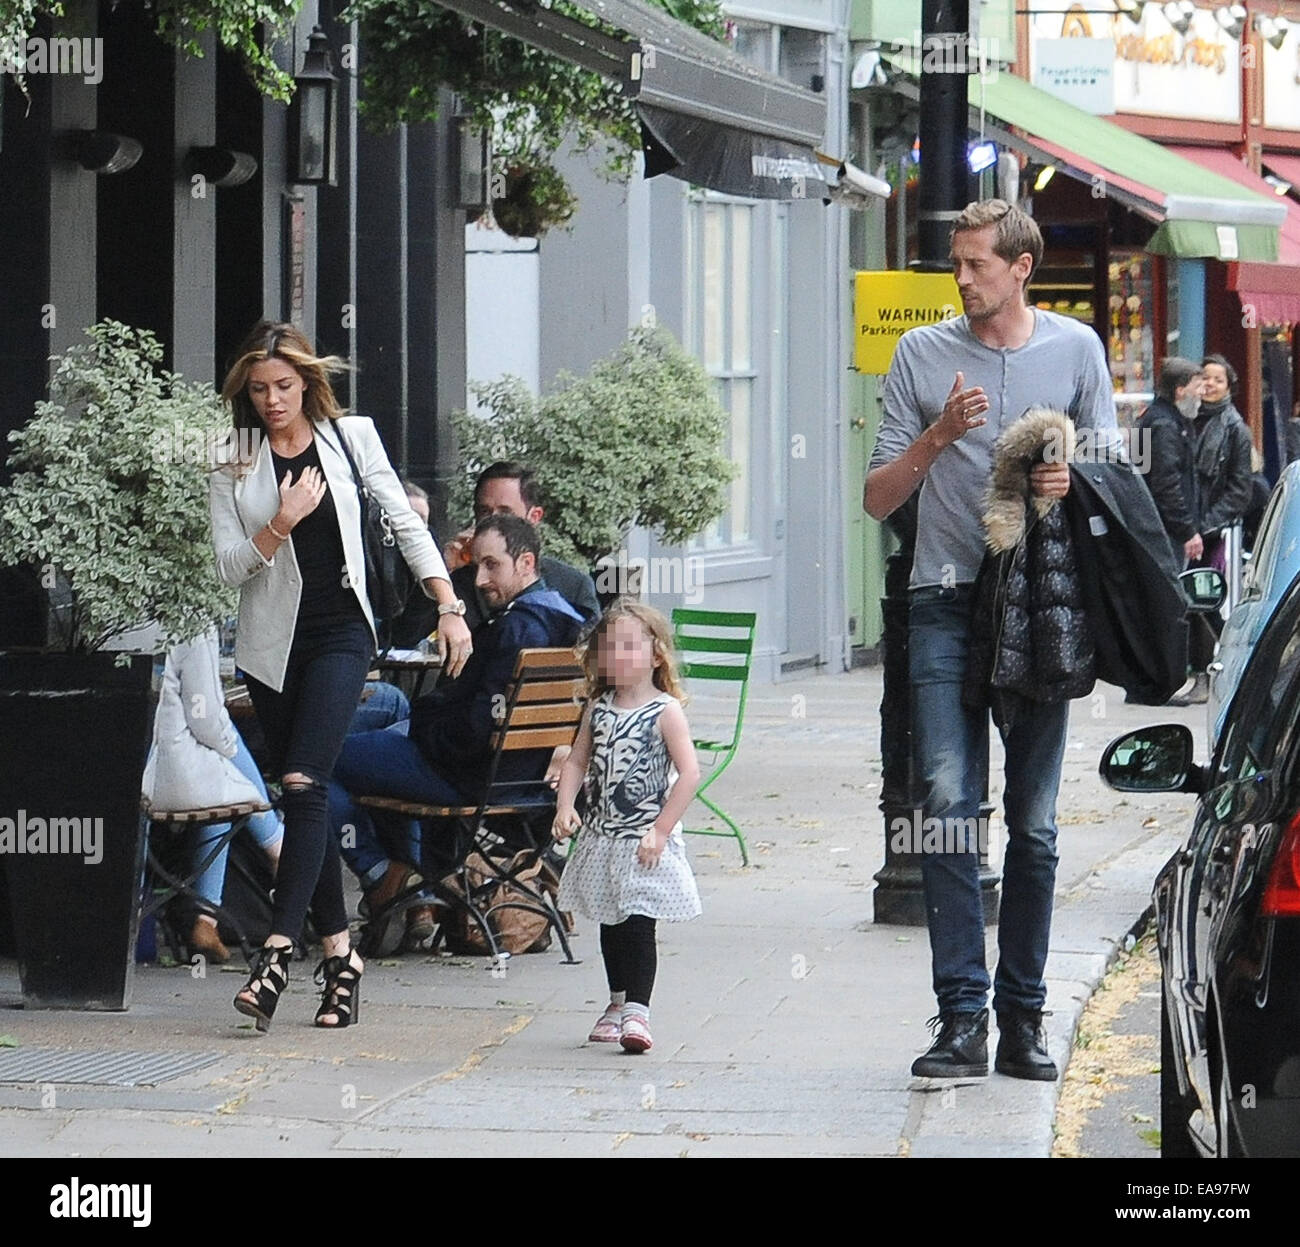 Abbey Clancy and Peter Crouch seen after having a family meal in ...